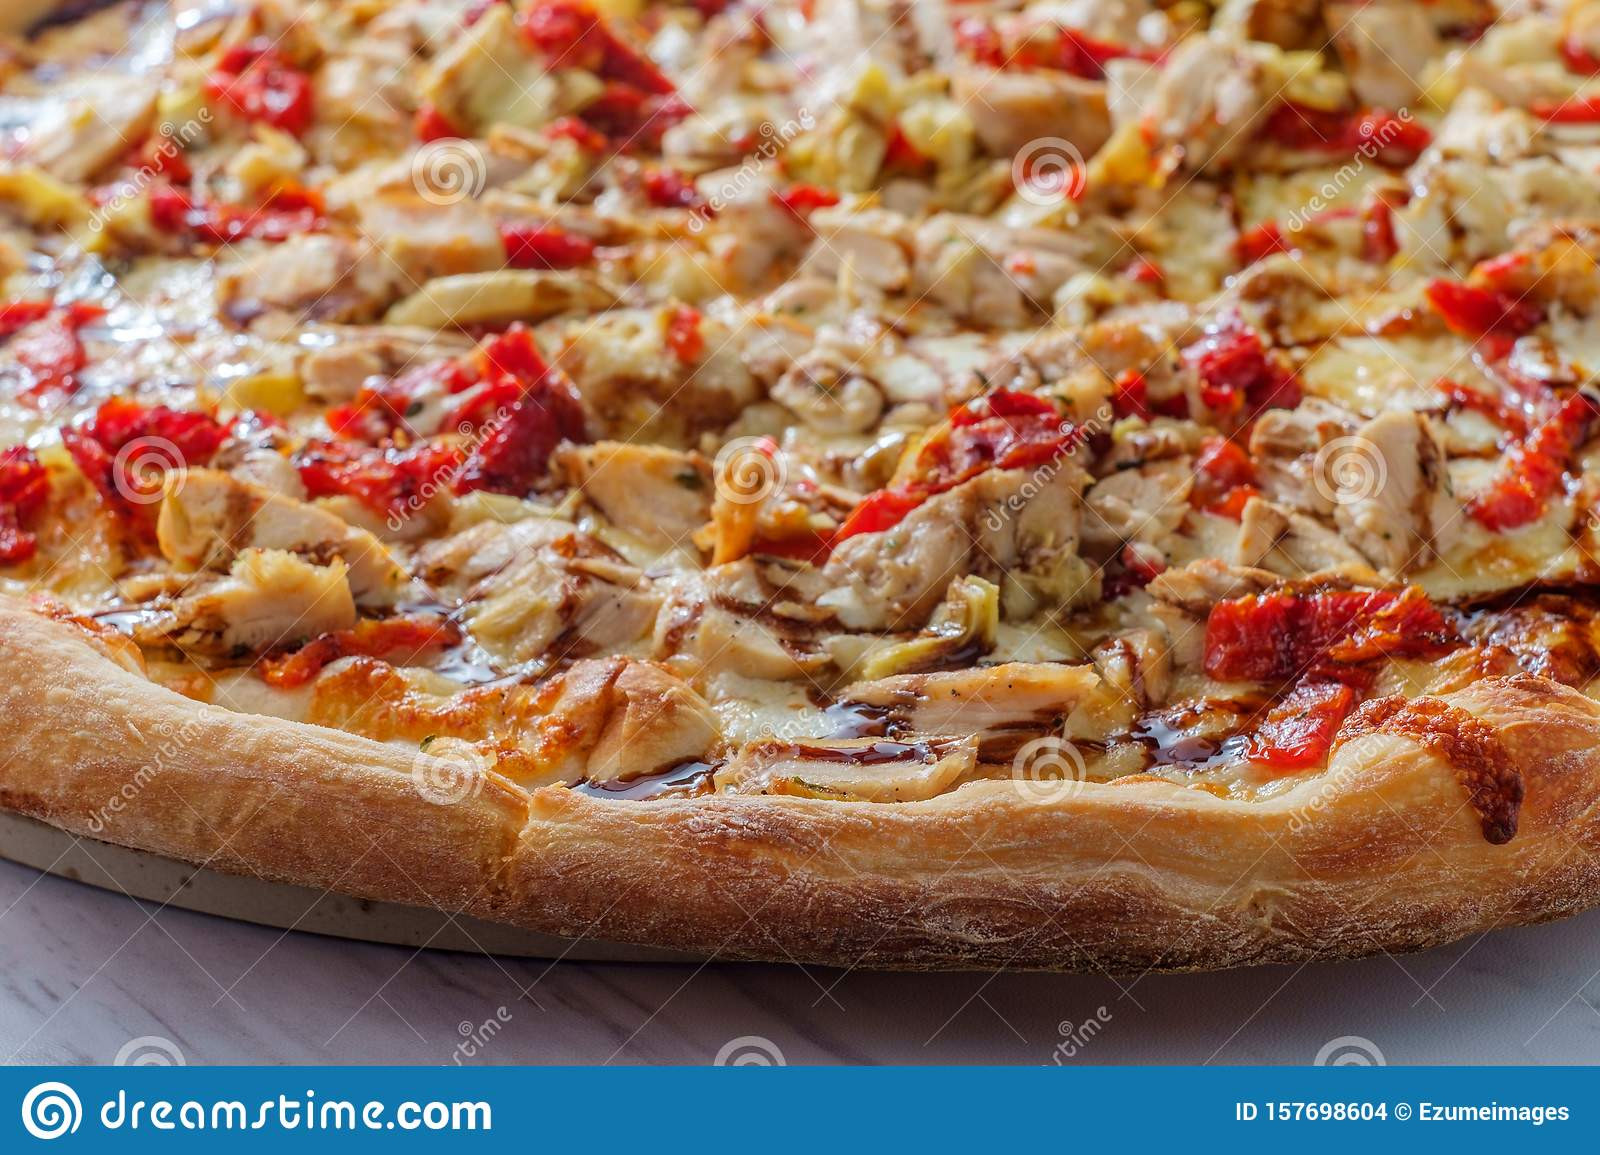 New York Chicken And Pizza
 New York Balsamic Chicken Pizza Stock Image of